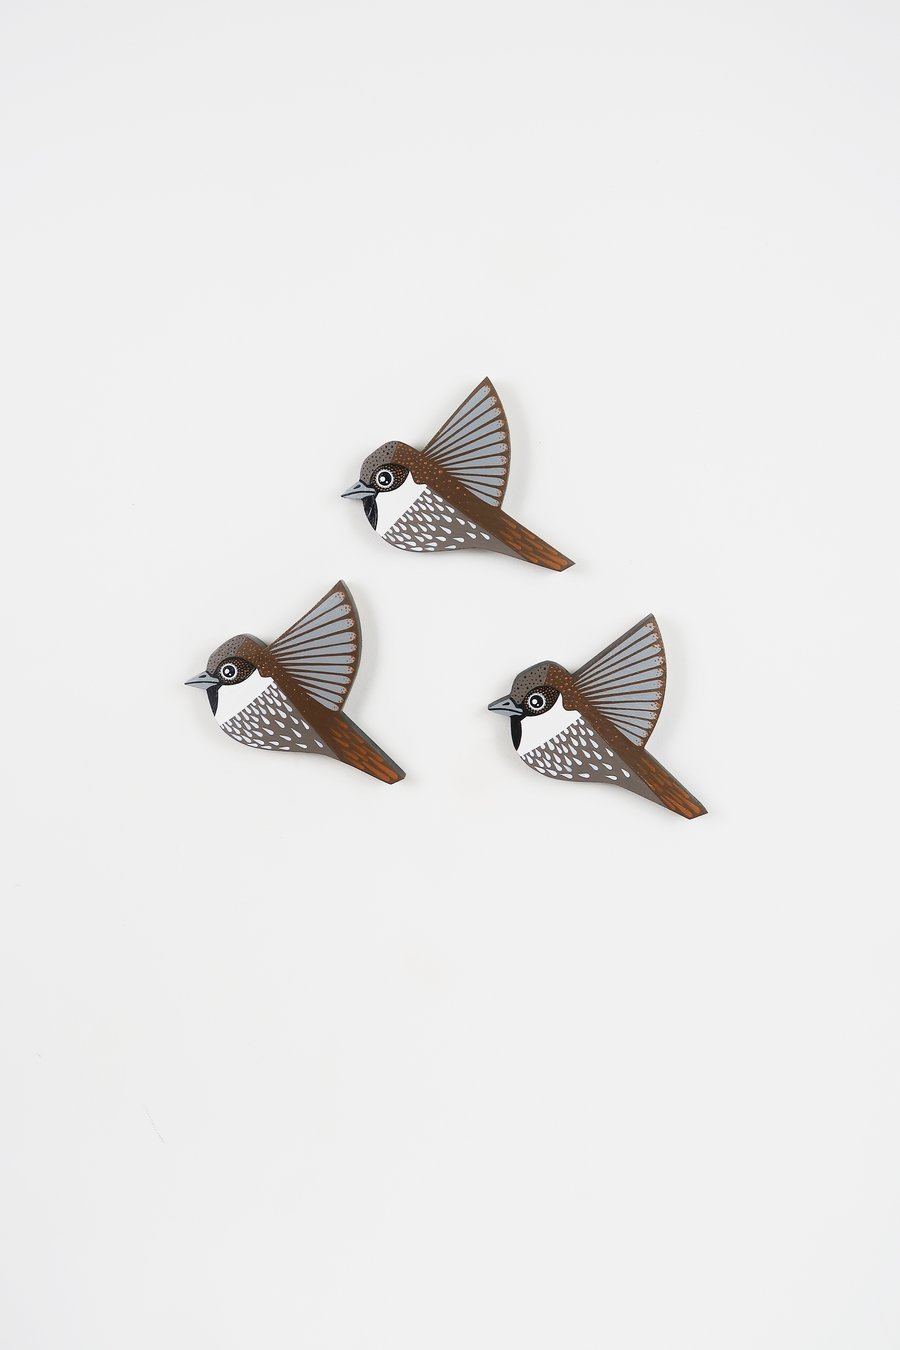 House sparrow wall hanging, set of 3 miniature flying birds, wooden decorations.